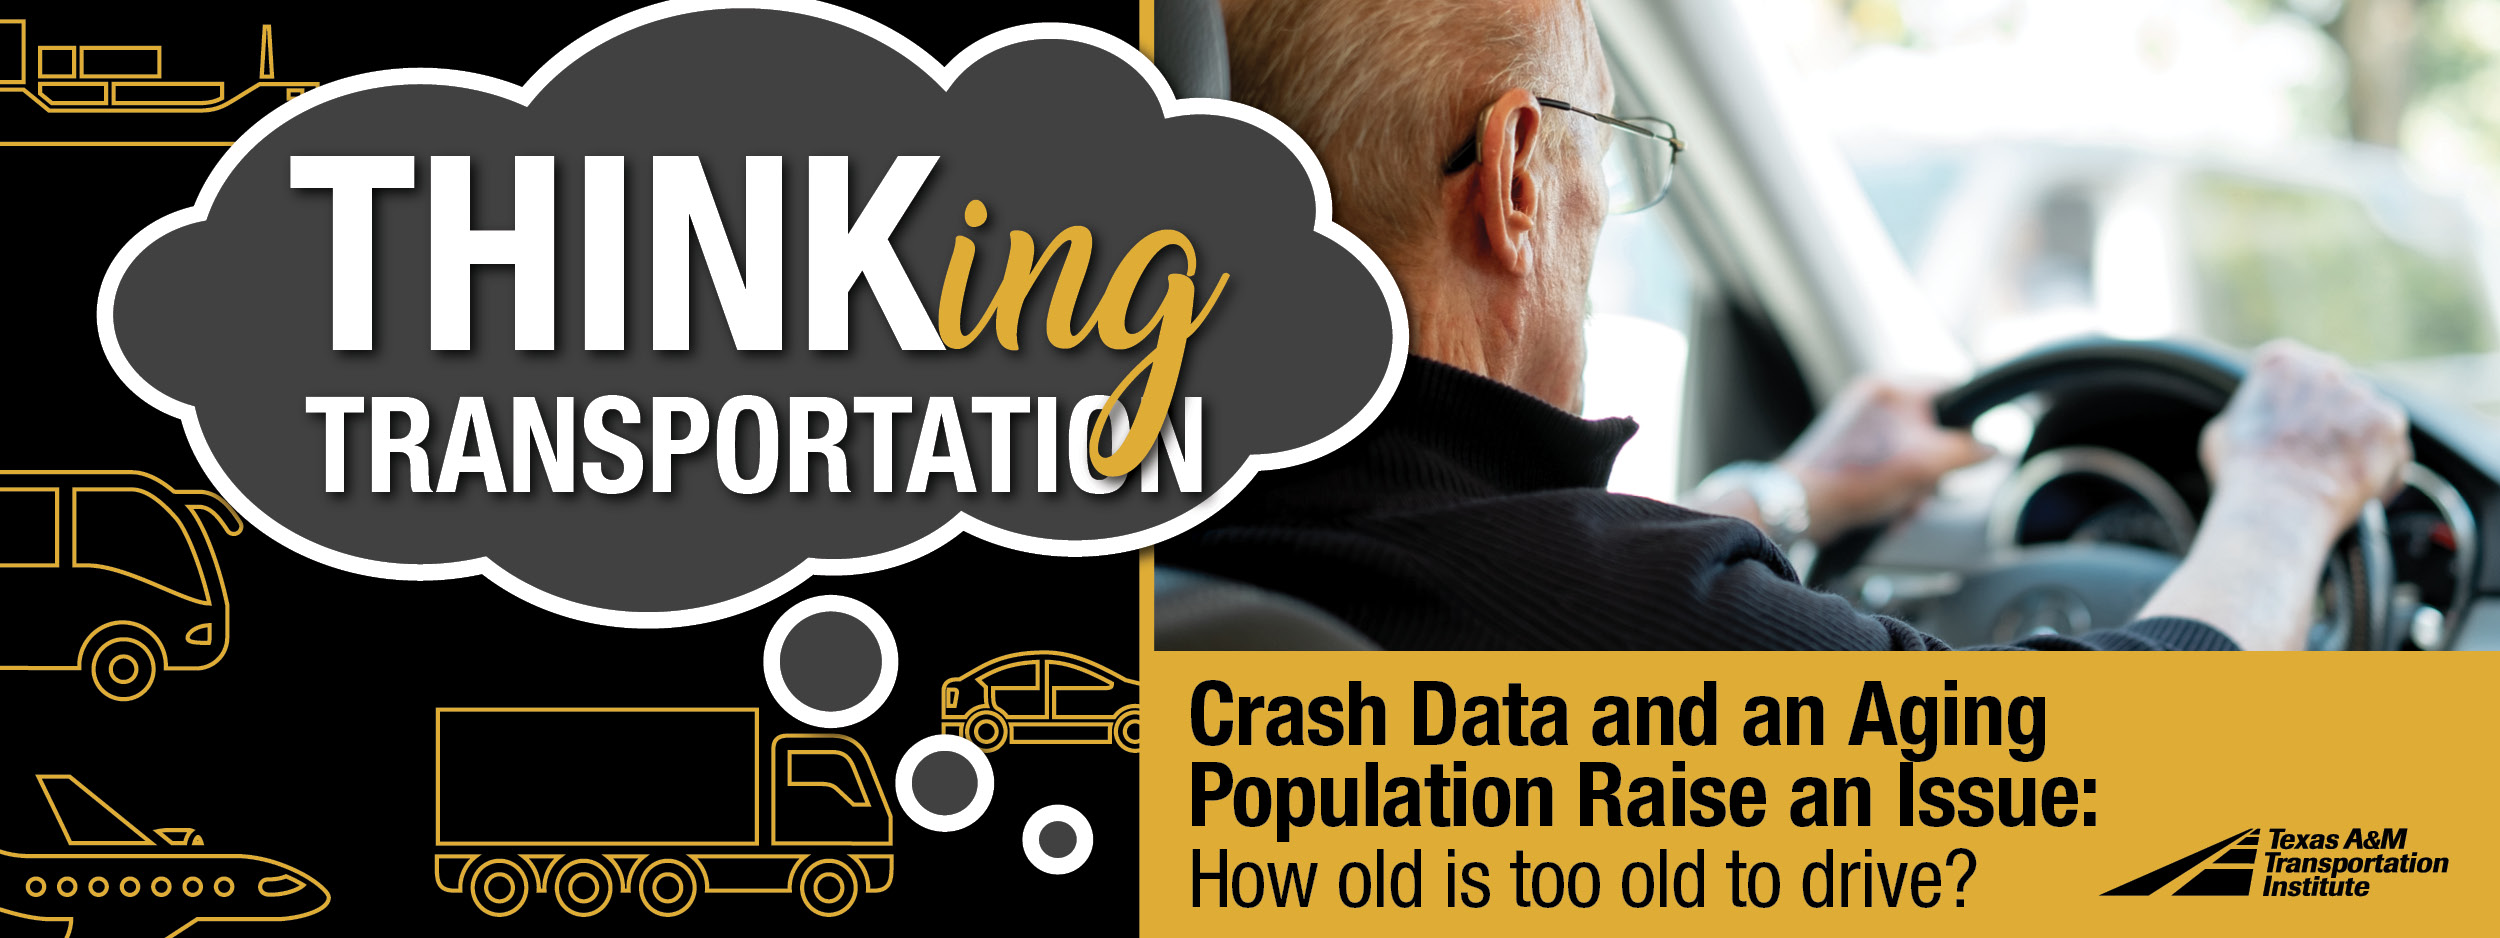 Thinking Transportation (Podcast): Crash Data and an Aging Population Raise an Issue: How old is too old to drive?